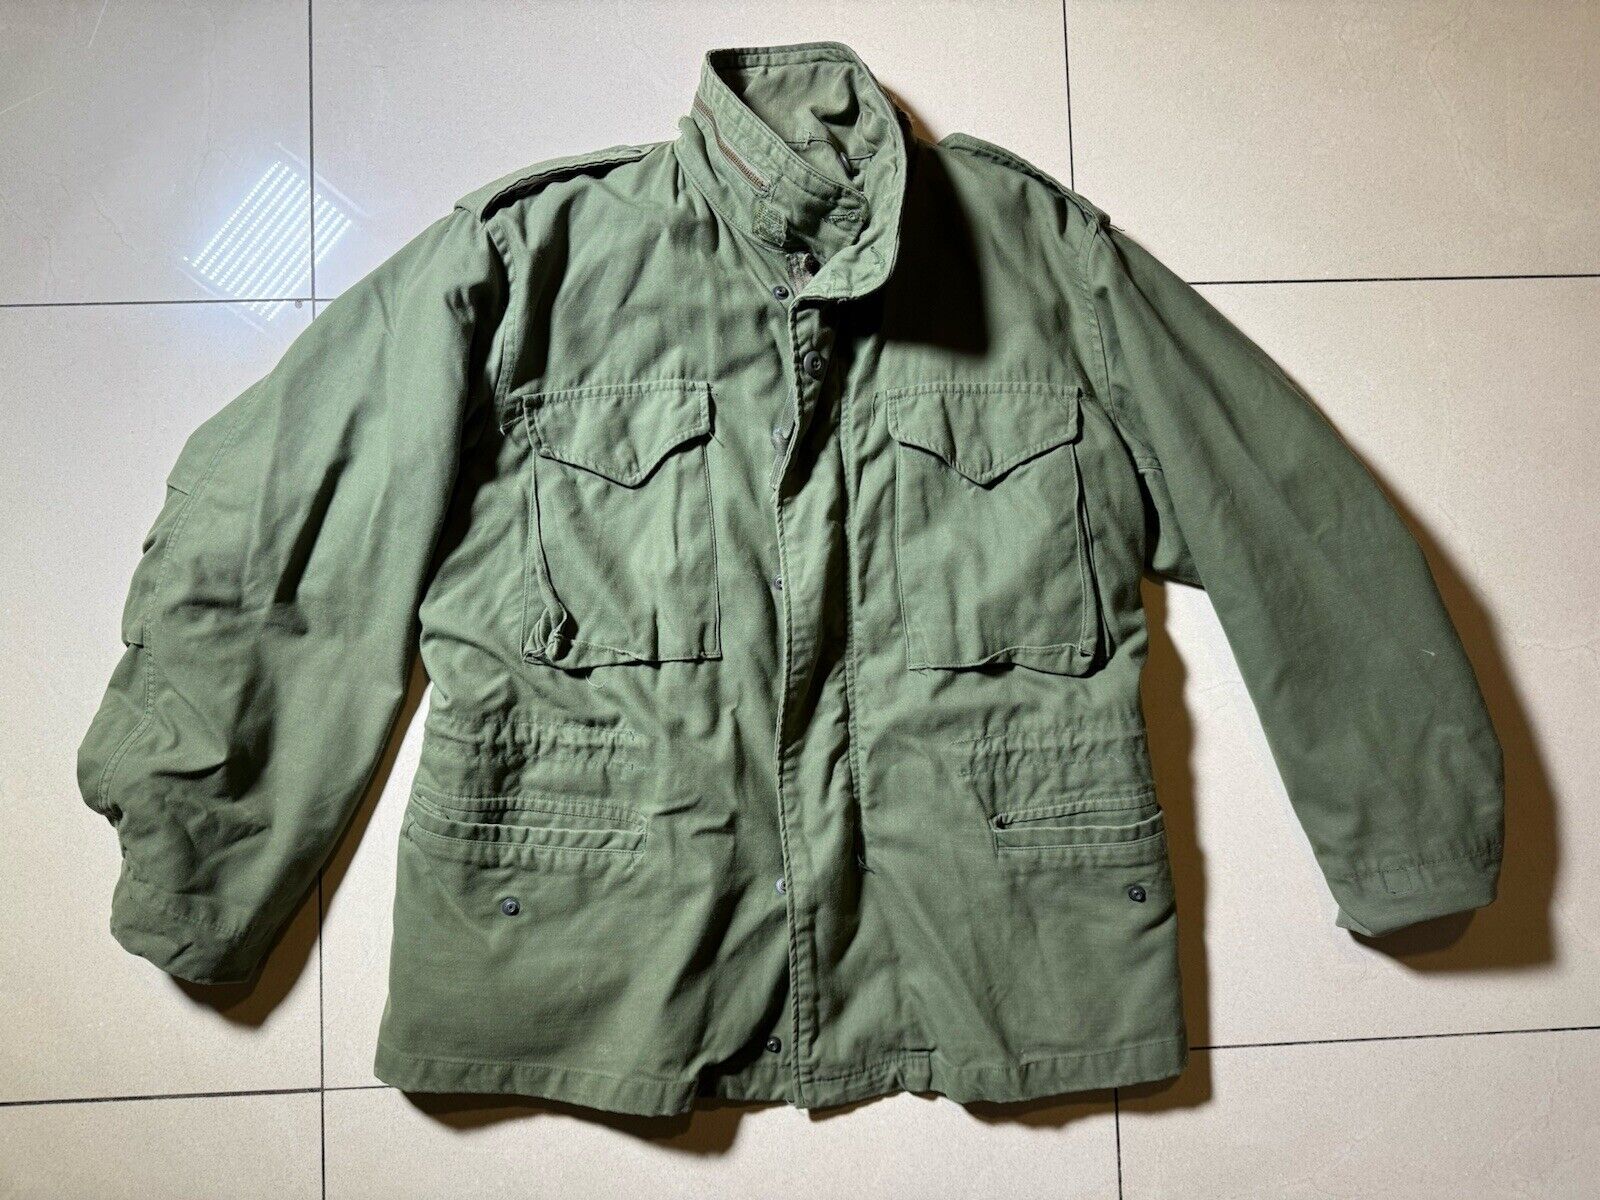 US Army M-65 Cold Weather Field Coat - Medium Short - OD Green -8415-00-782-2938